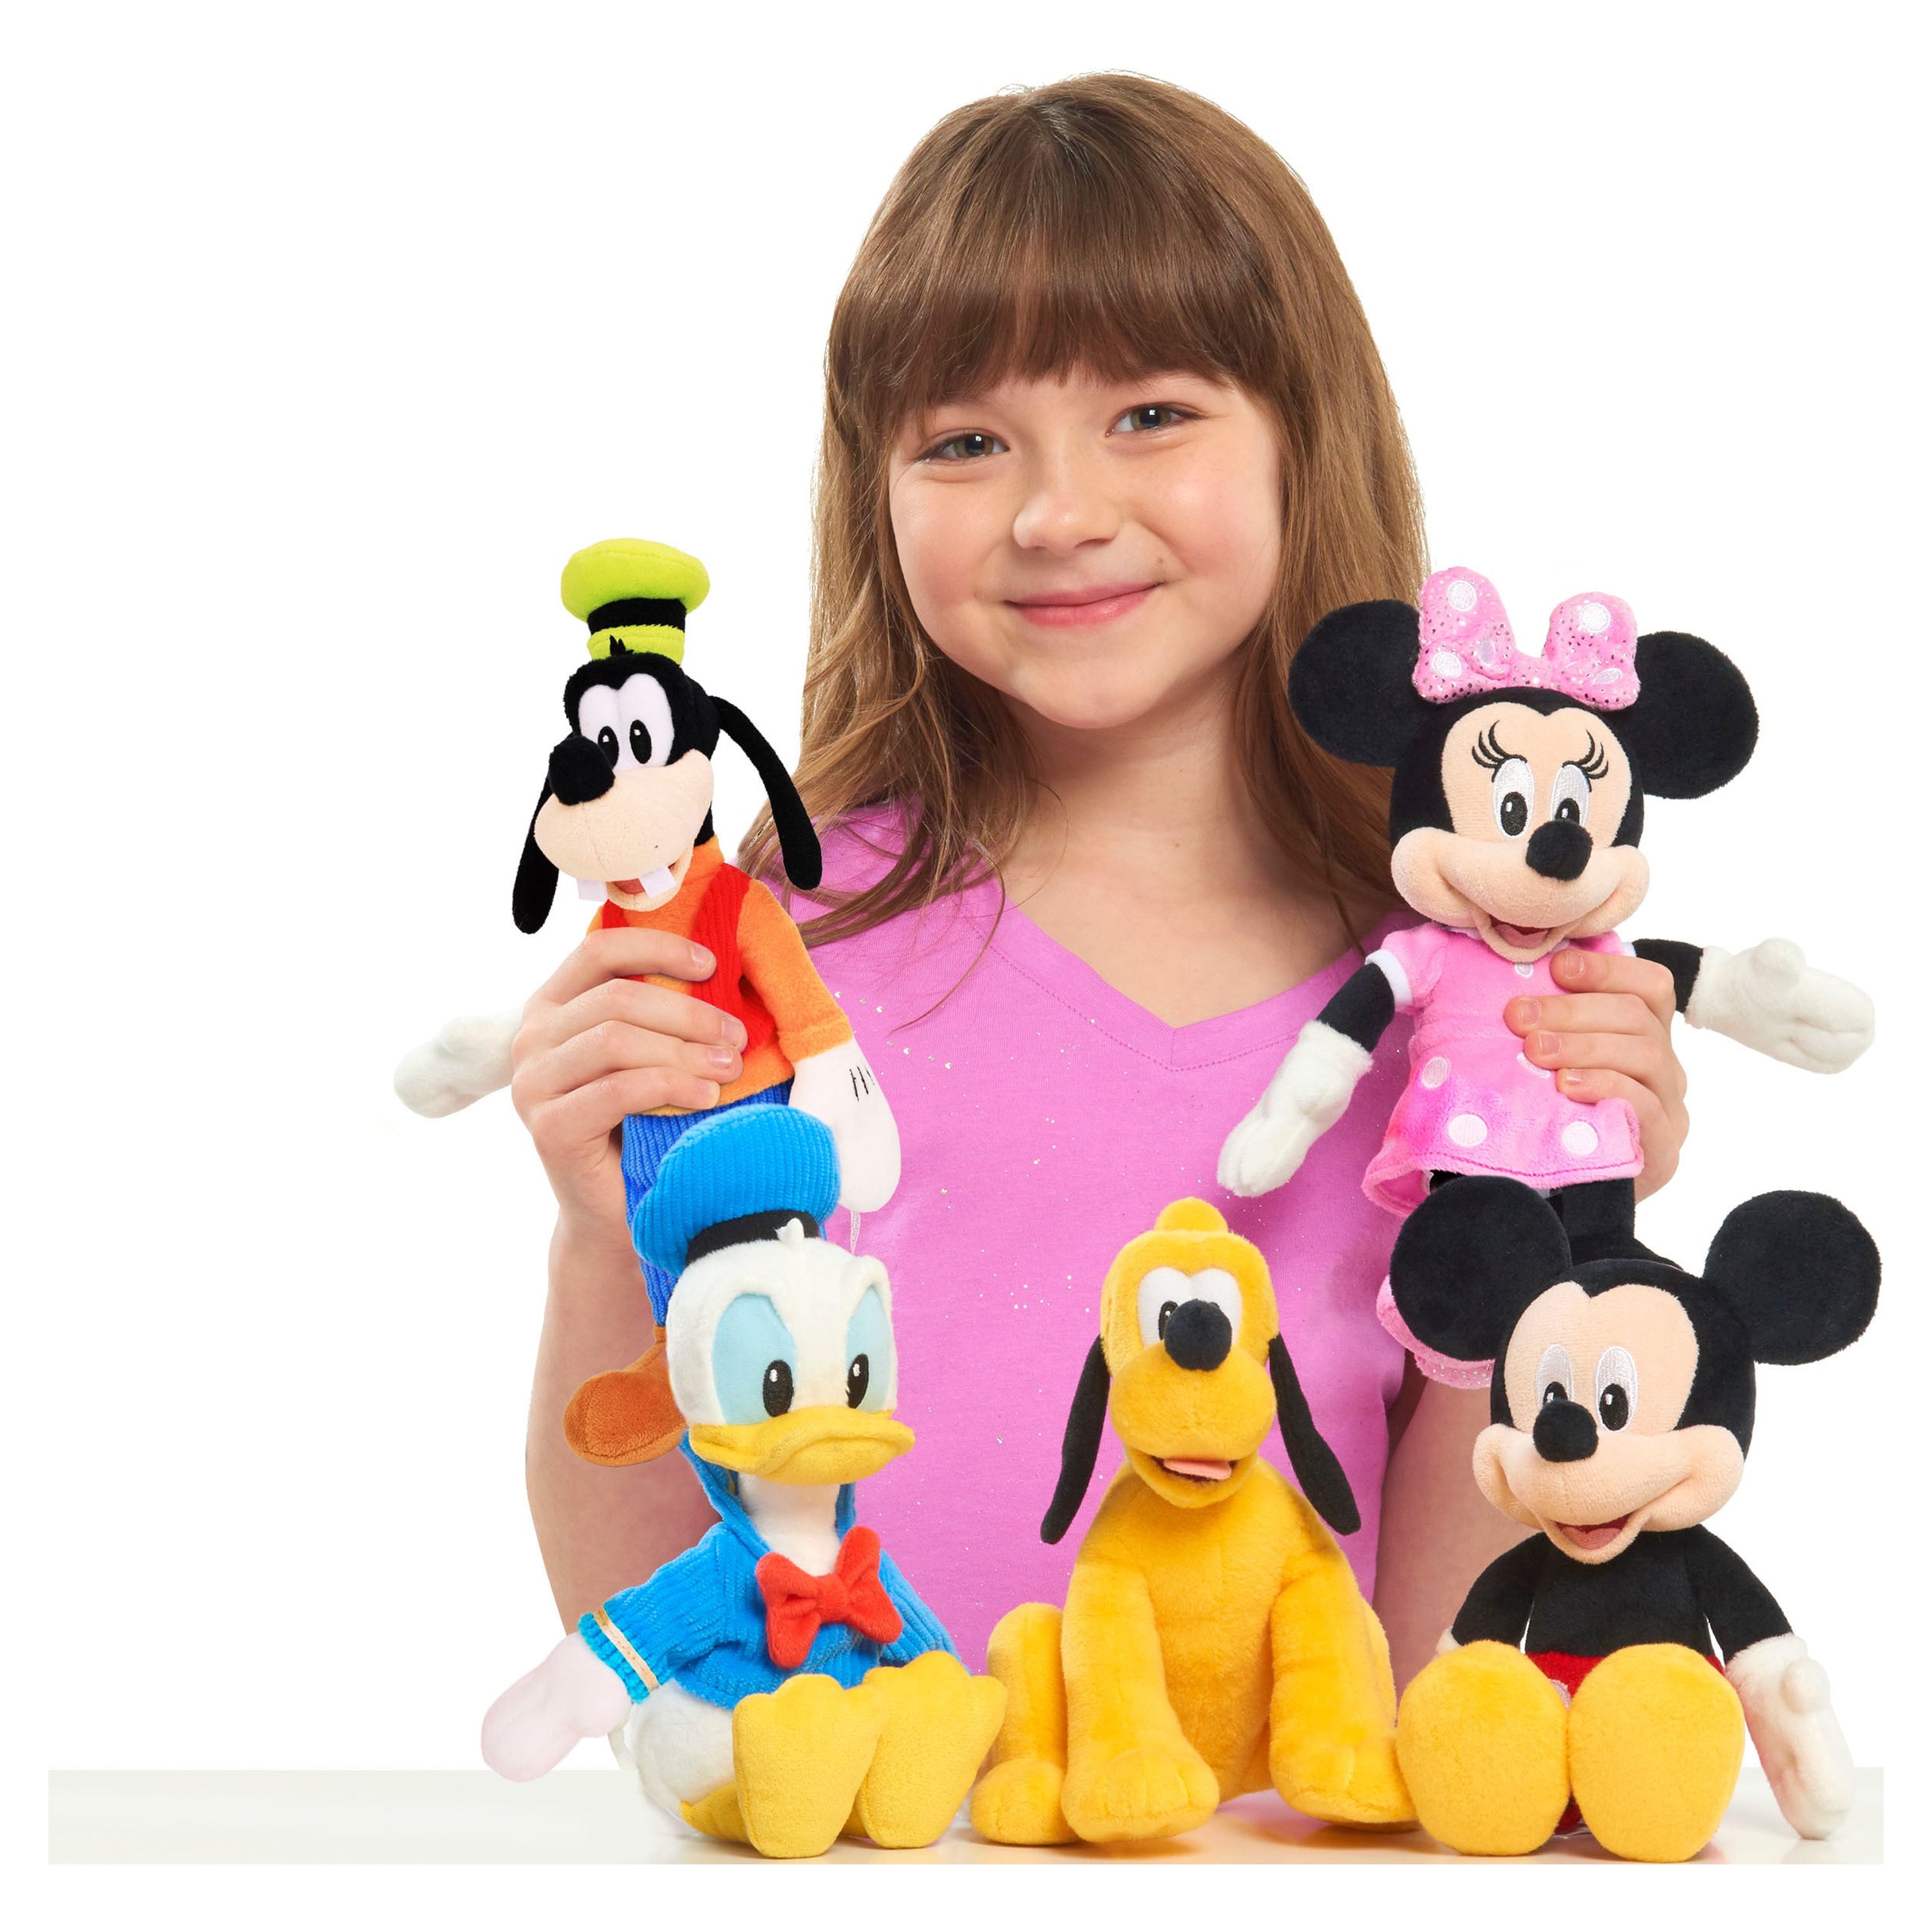 Mickey Mouse Clubhouse 9-inch Plush 5-pack, Mickey Mouse, Minnie Mouse, Donald Duck, Goofy, and Pluto, Stuffed Animals, Officially Licensed Kids Toys for Ages 2 Up, Gifts and Presents - image 2 of 6